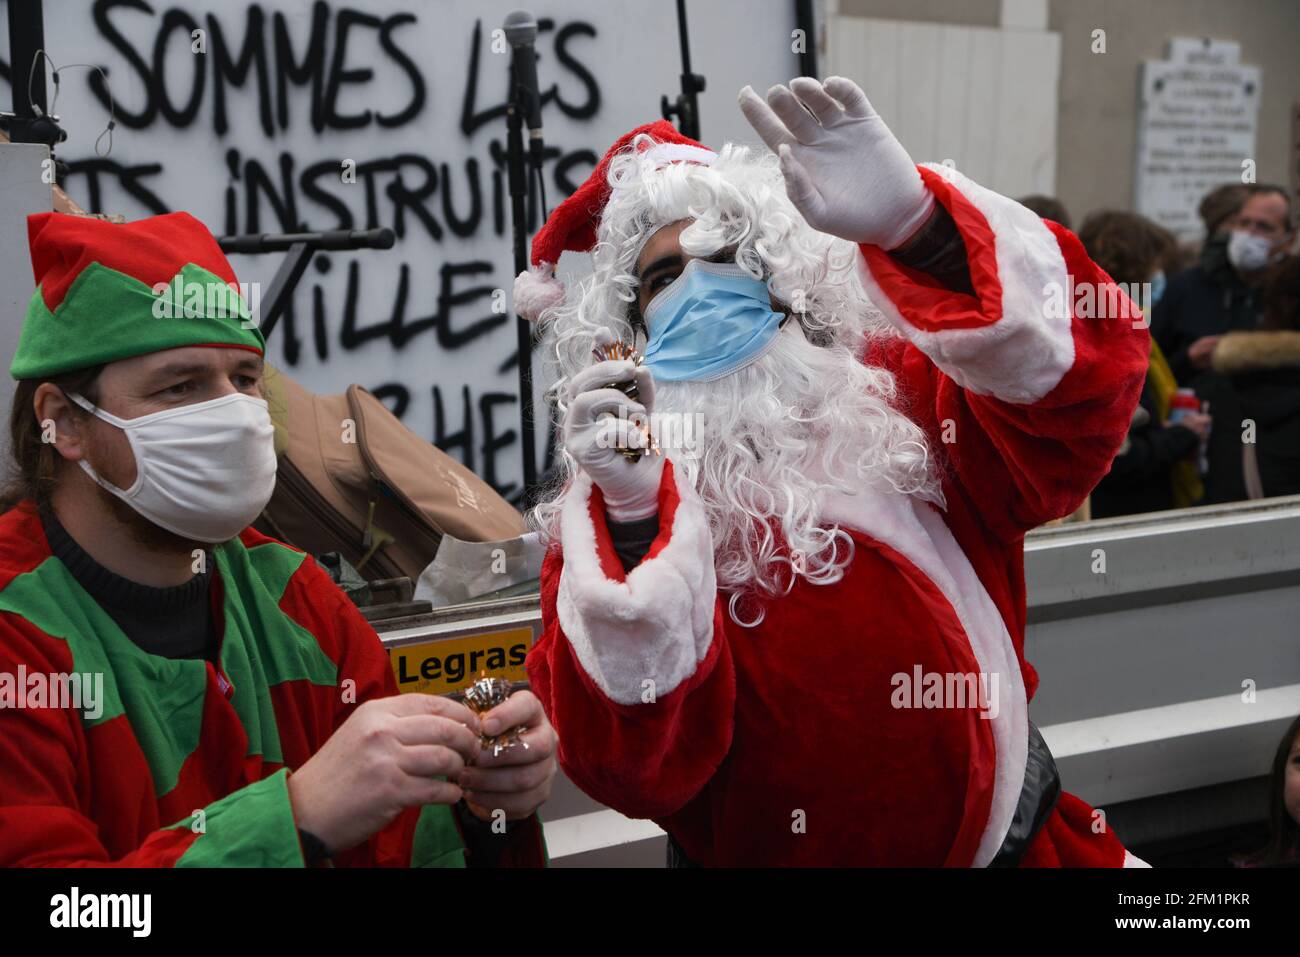 *** STRICTLY NO SALES TO FRENCH MEDIA OR PUBLISHERS - RIGHTS RESERVED ***December 06, 2020 - Melun, France: A masked Santa Claus distributes candies as French families protest against the government's plan to force parents to put their children at school. Between 200 and 300 people, including several children, marched to defend their rights to 'Instruction En Famille' (IEF, instruction within the family). The French government wants to ban home schooling in its law against 'separatism' aimed at fighting radical islam in the country. Currently, education is compulsory for all children in France Stock Photo